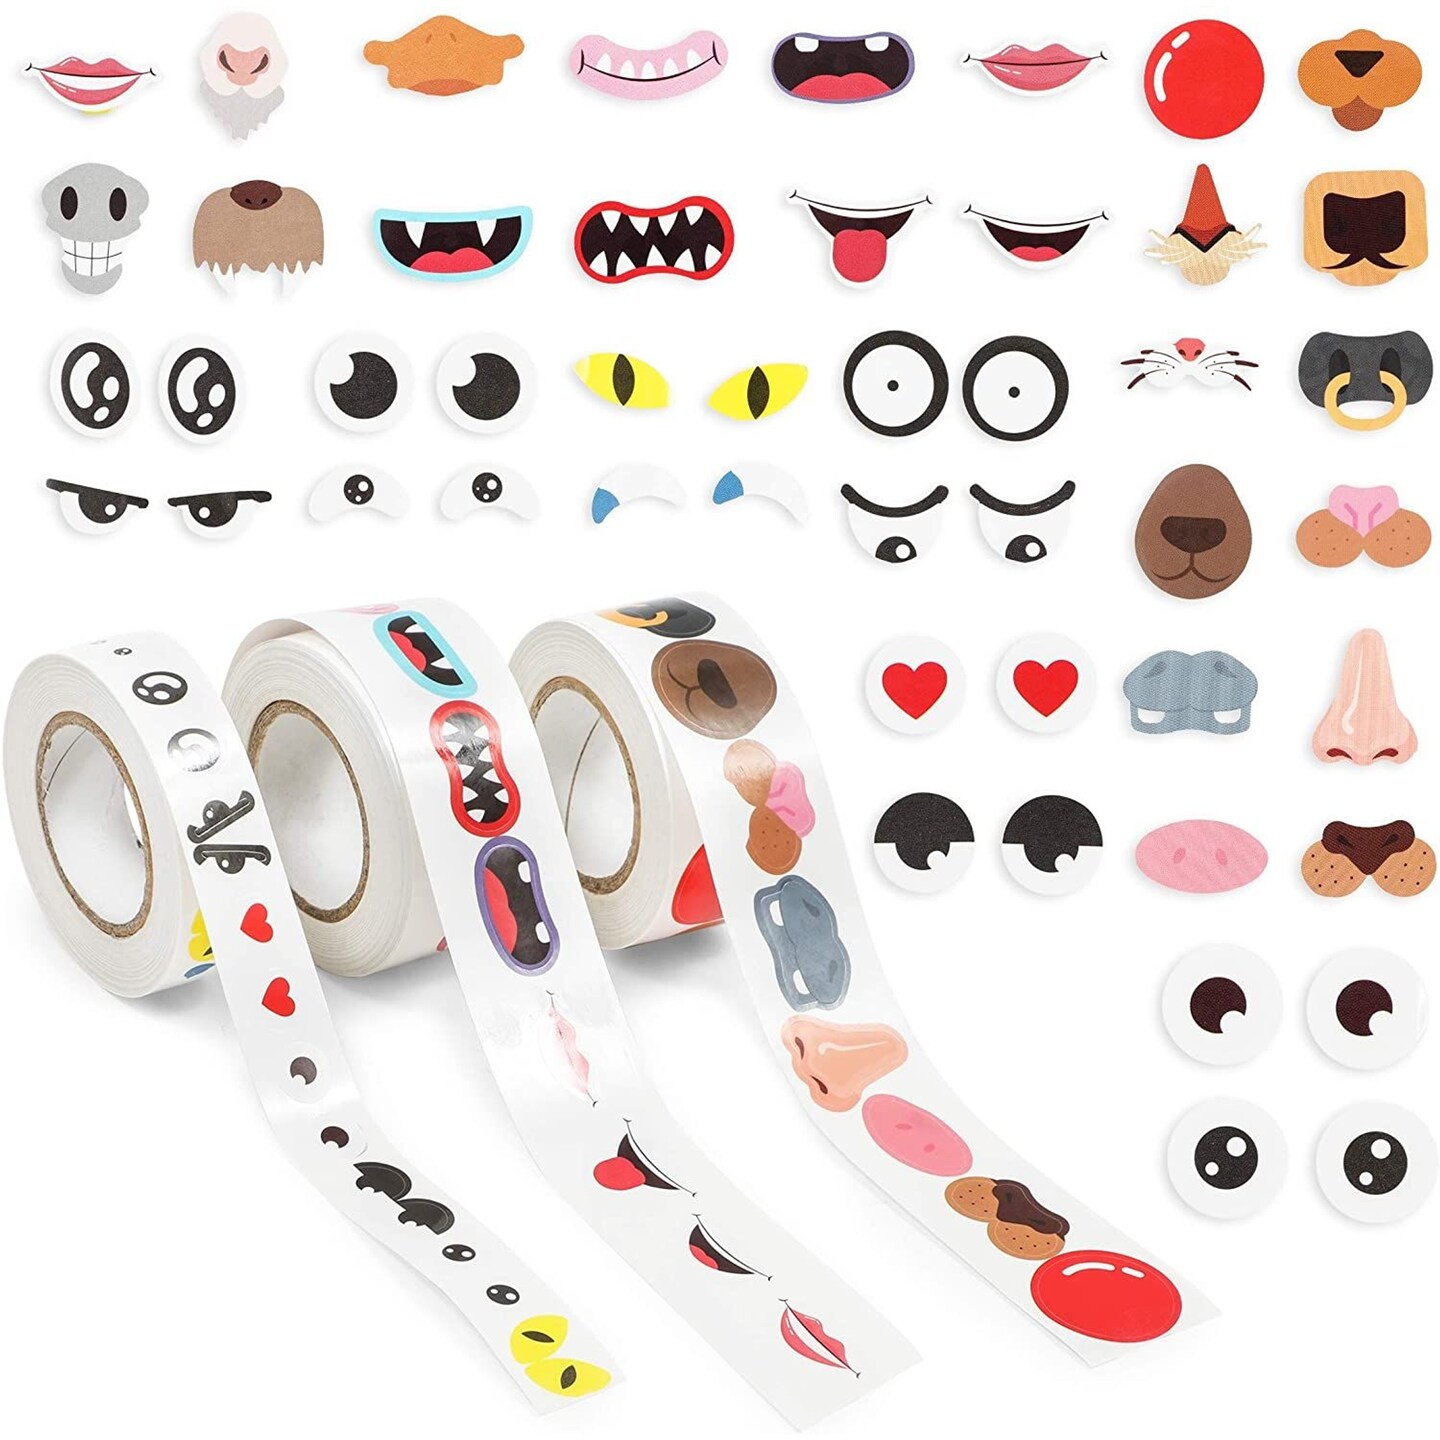  1500 Pack of Face Stickers for Kids, Silly Eyes, Nose, and  Mouth for Crafts (3 Rolls) : Toys & Games